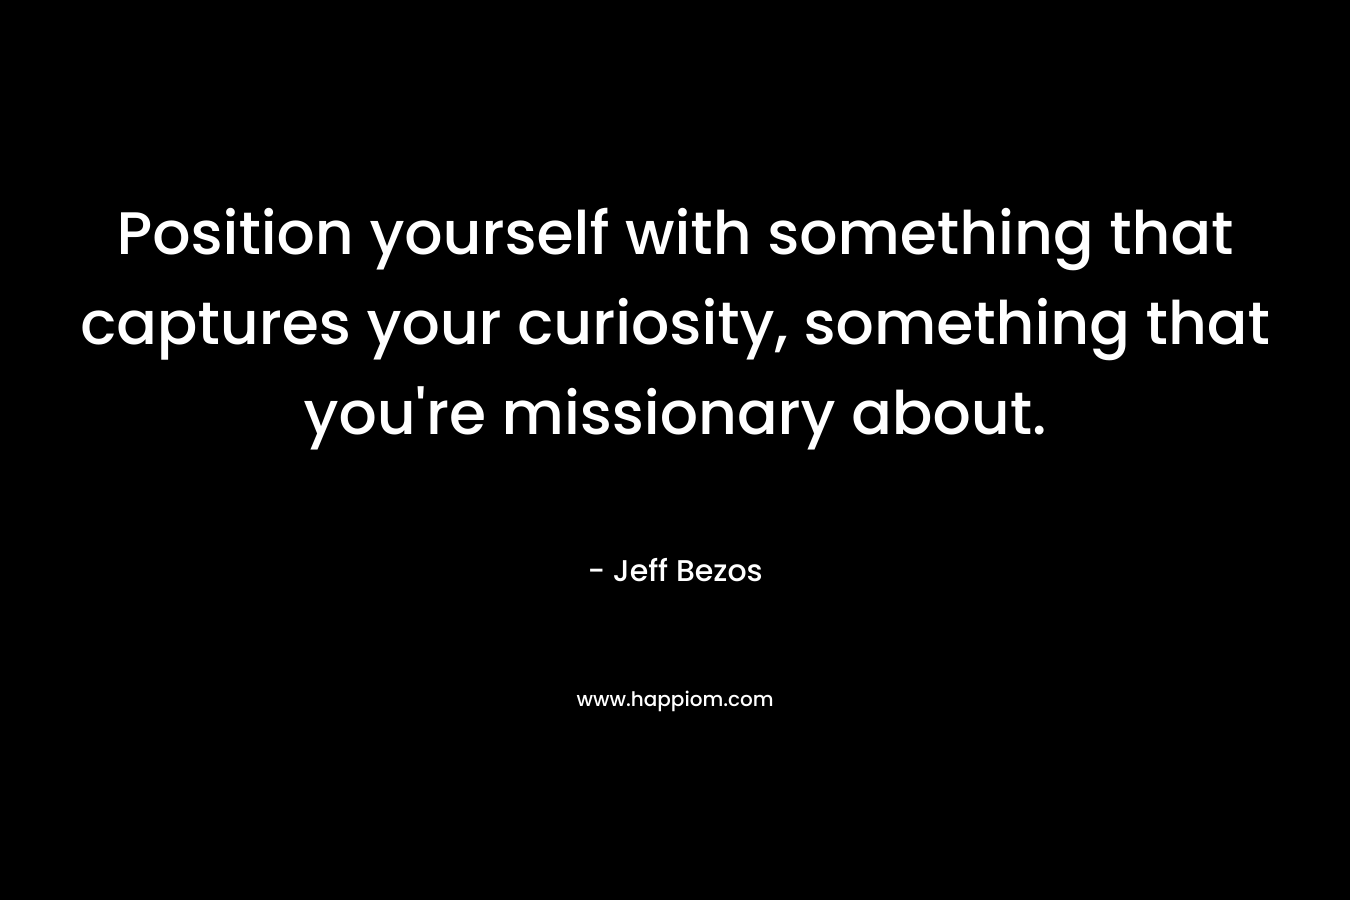 Position yourself with something that captures your curiosity, something that you’re missionary about. – Jeff Bezos